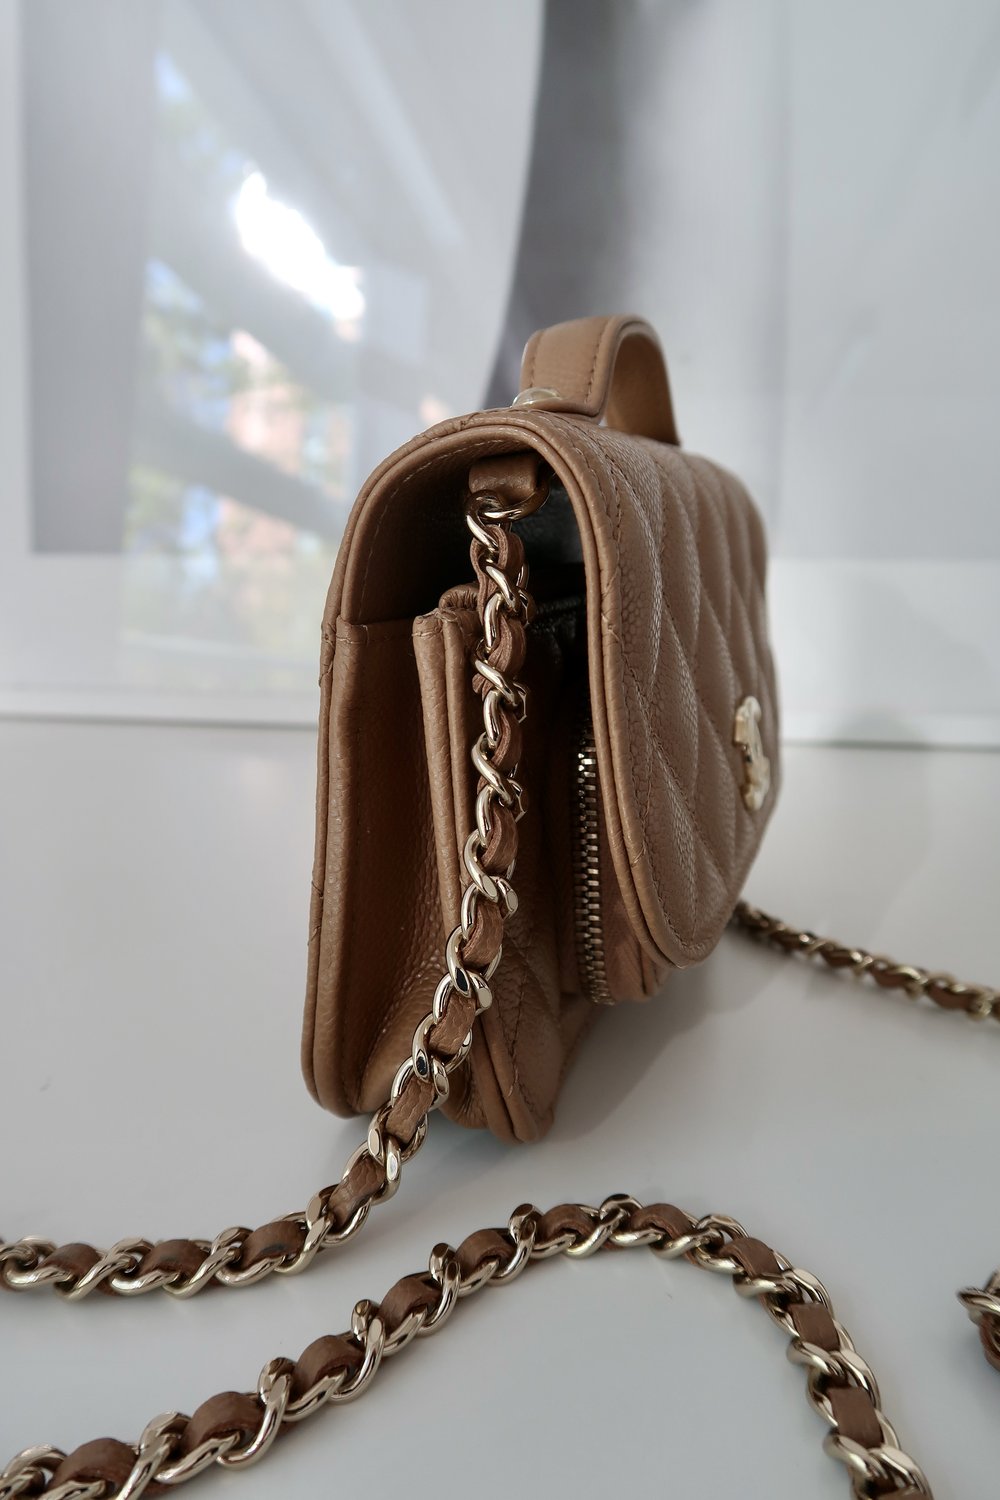 Chanel Business Affinity Beige Mini Woc — Blaise Ruby Loves